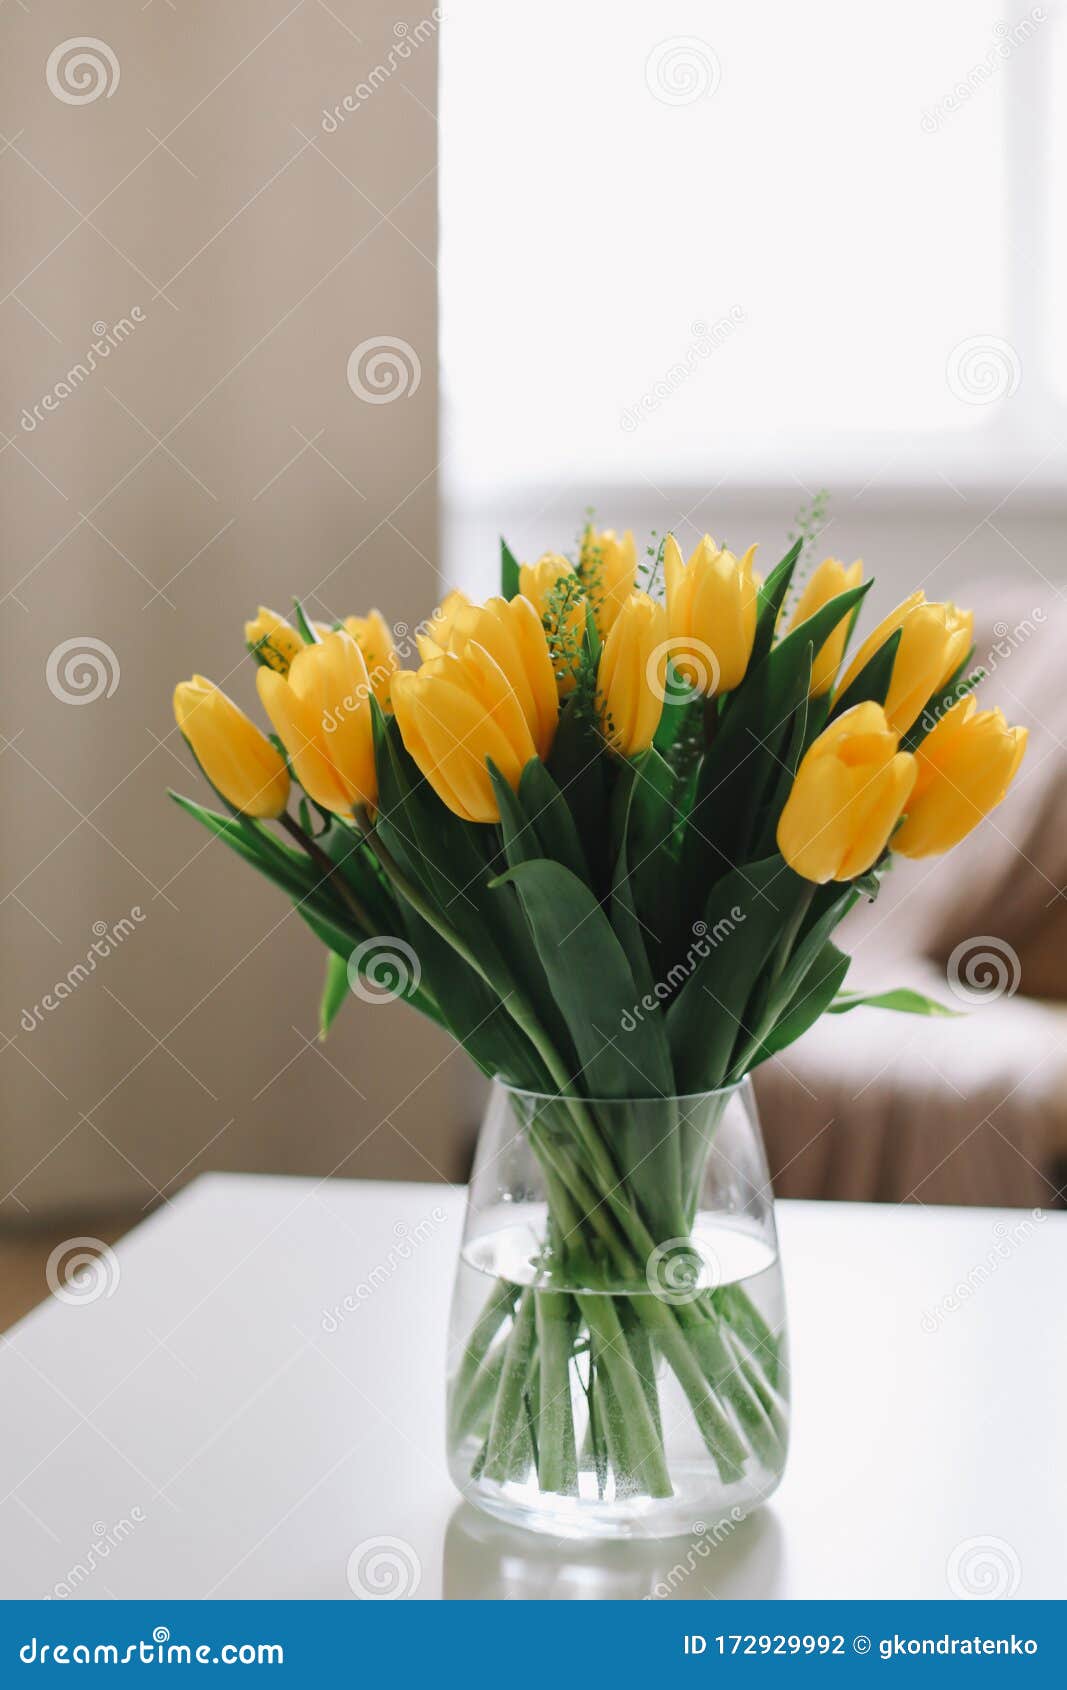 Spring Flowers in Living Room Interior. Bouquet of Fresh Yellow Tulips ...